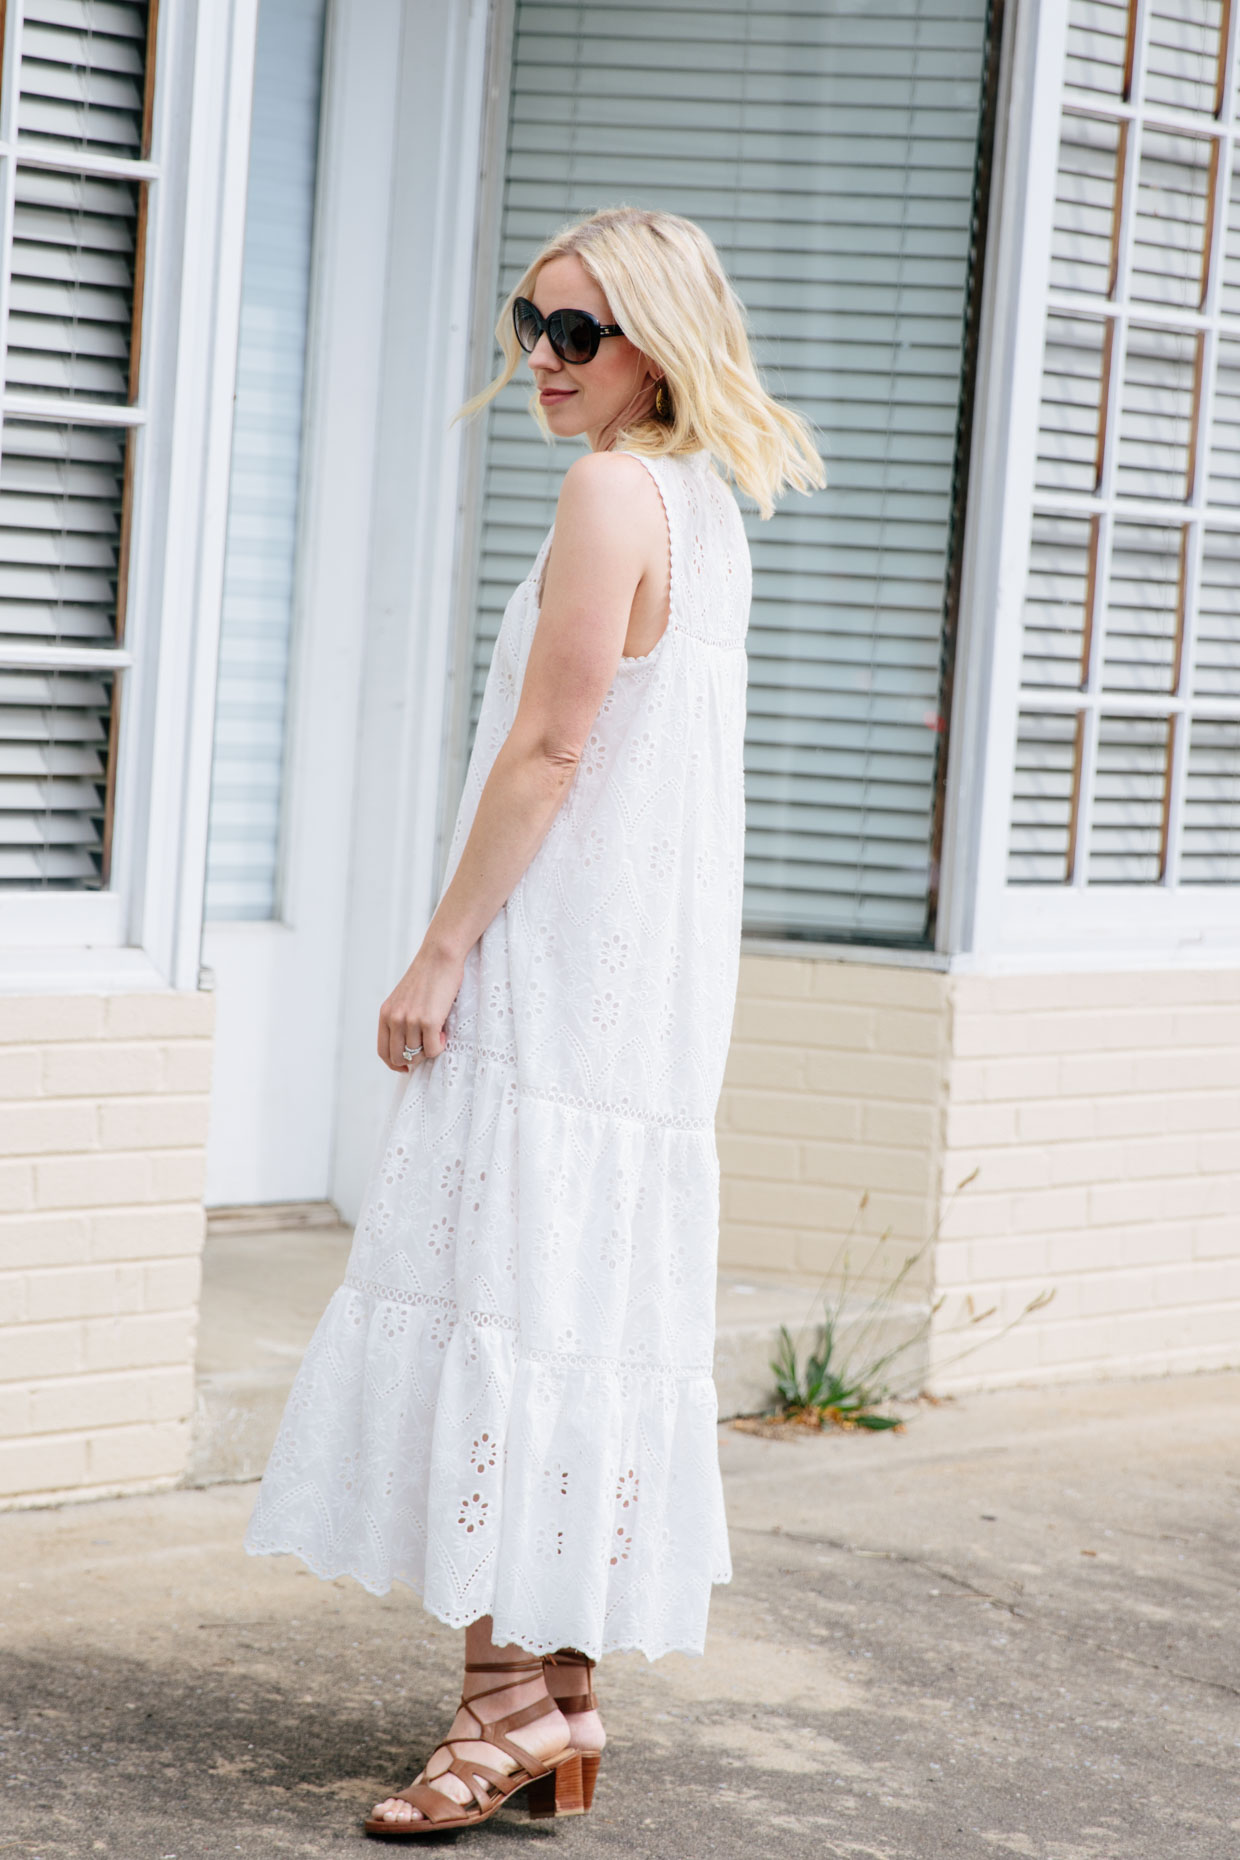 The Ultimate Eyelet Dress for Hot Summer Days - Meagan's Moda